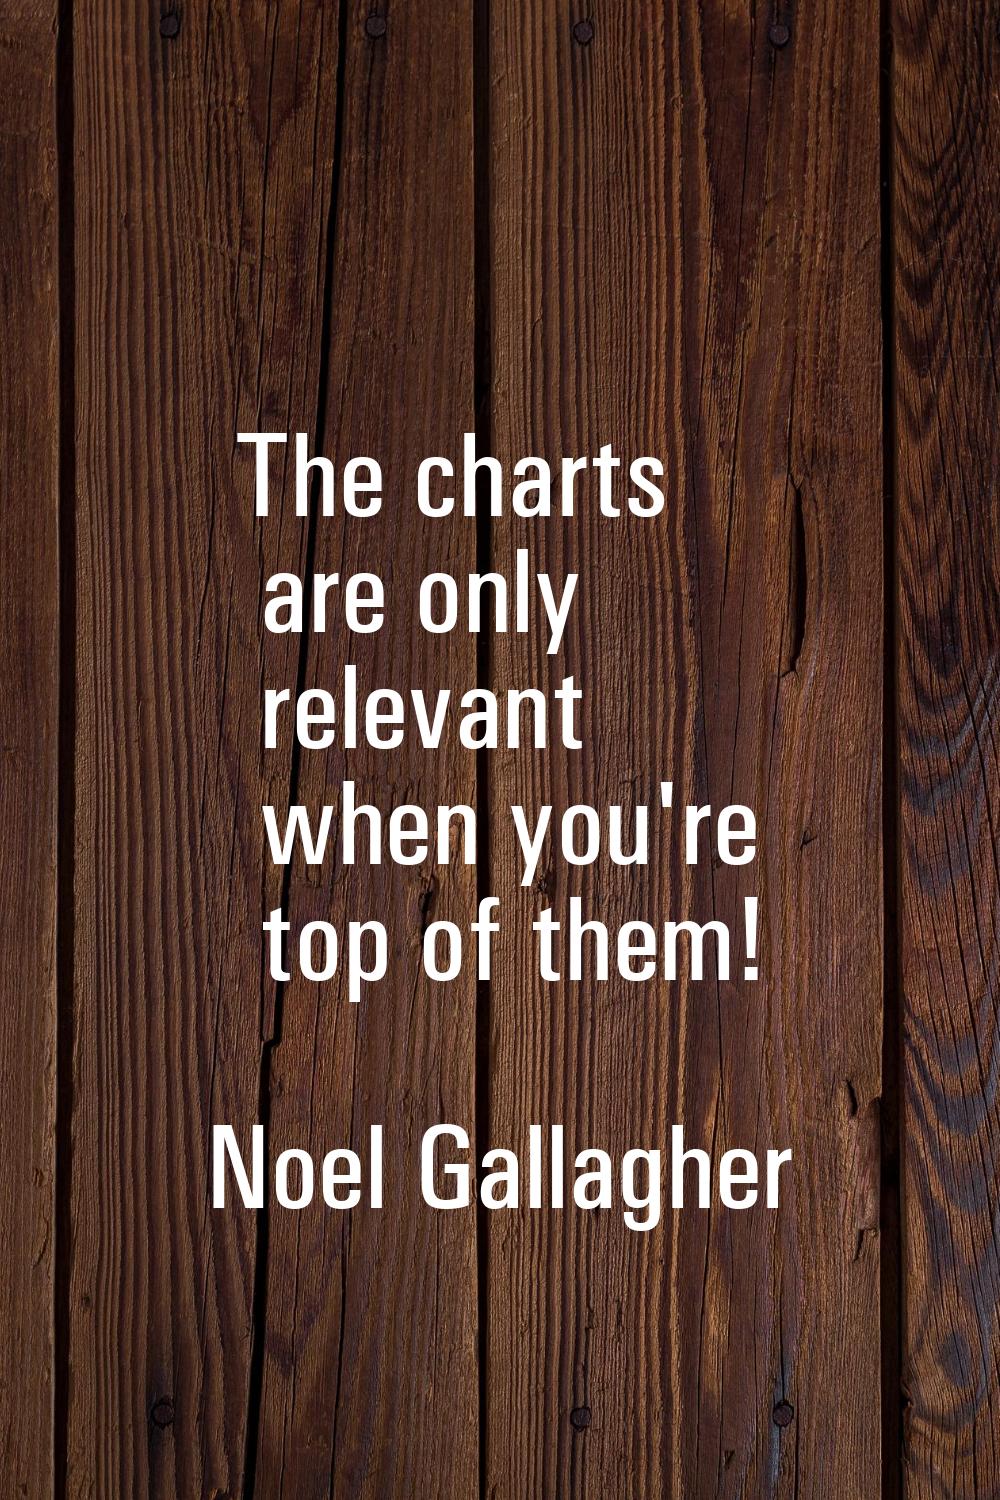 The charts are only relevant when you're top of them!